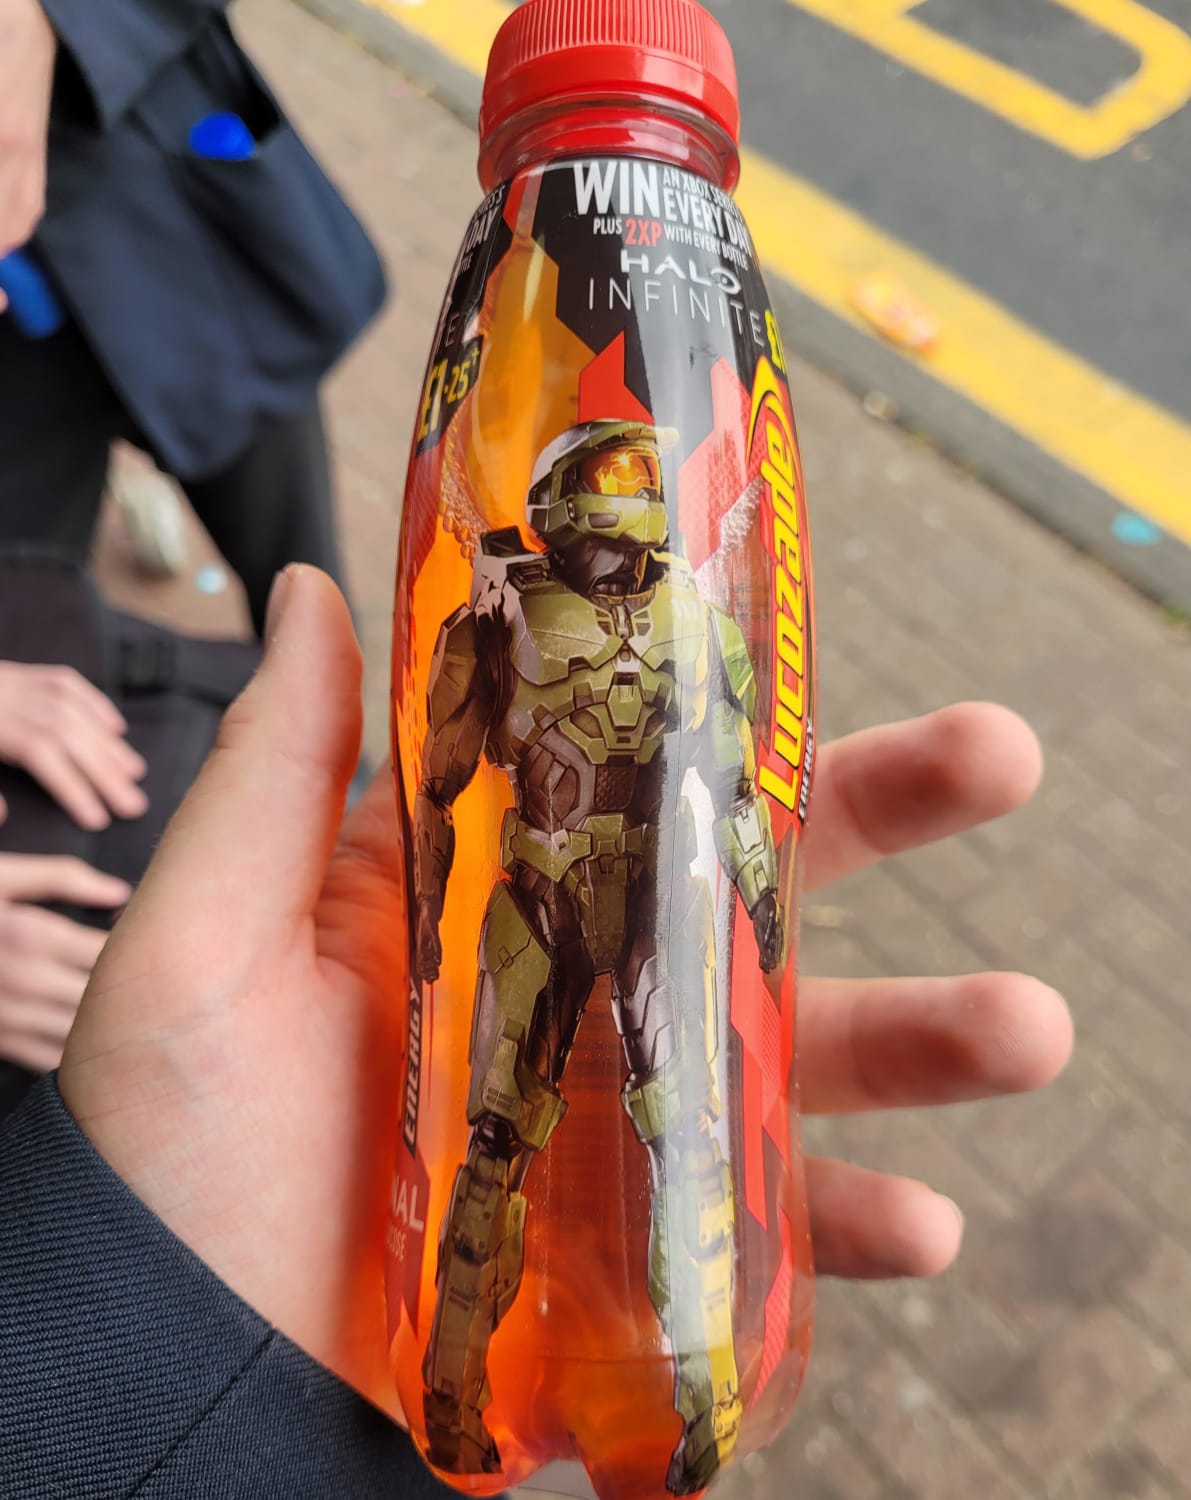 They put the Master Chief on the soda (again)